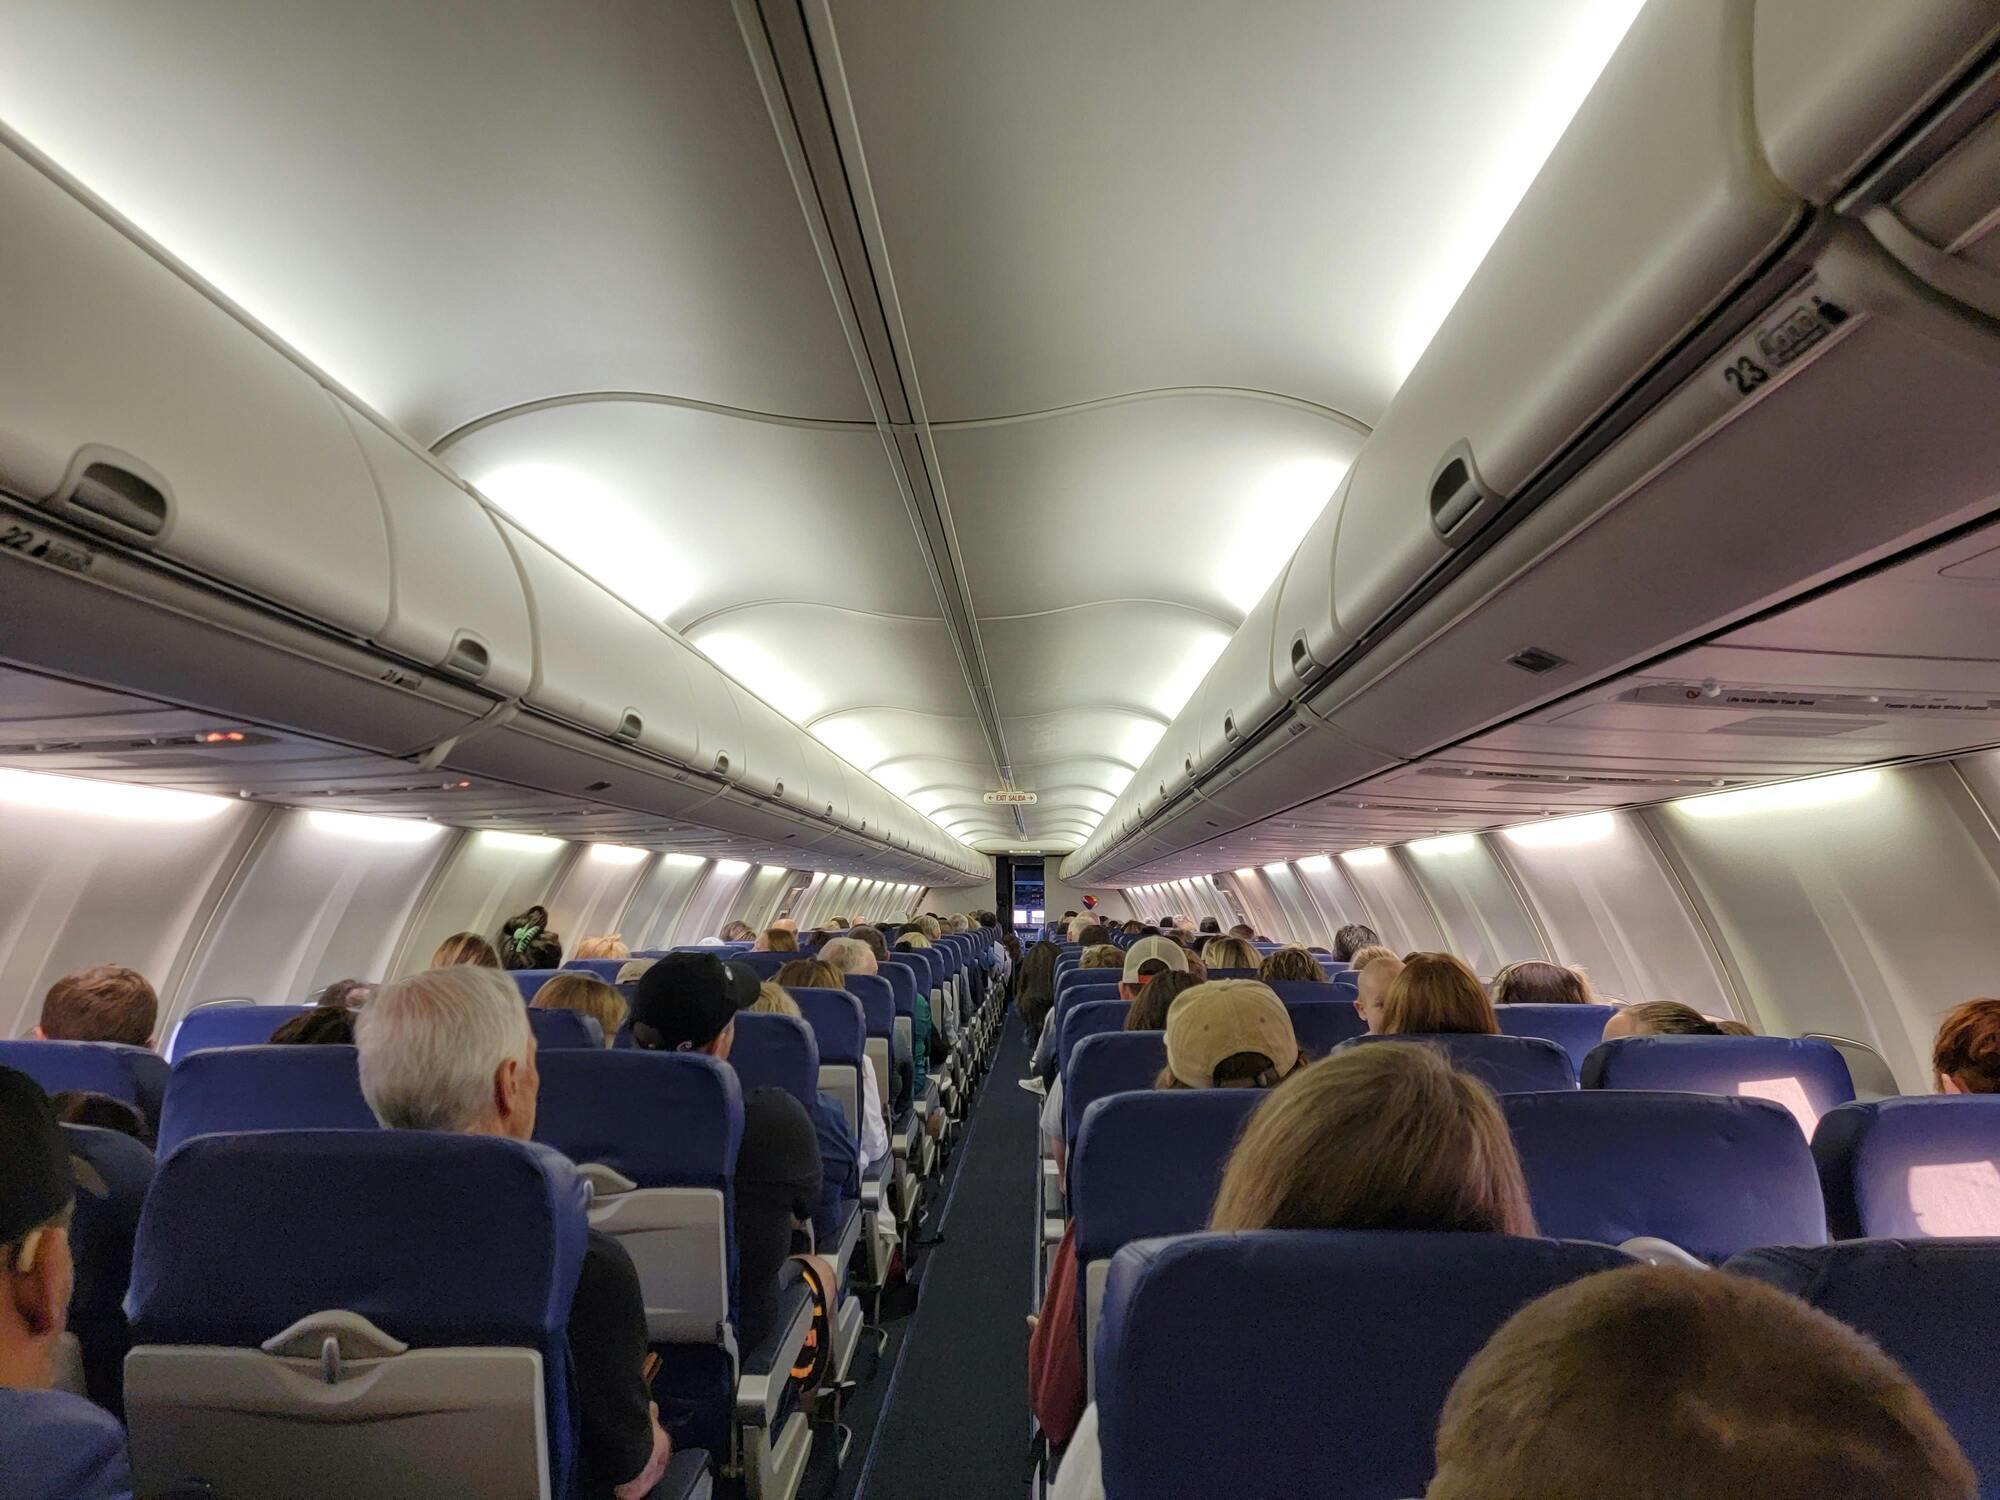 How to get a better seat on the plane: life hack from an experienced traveler